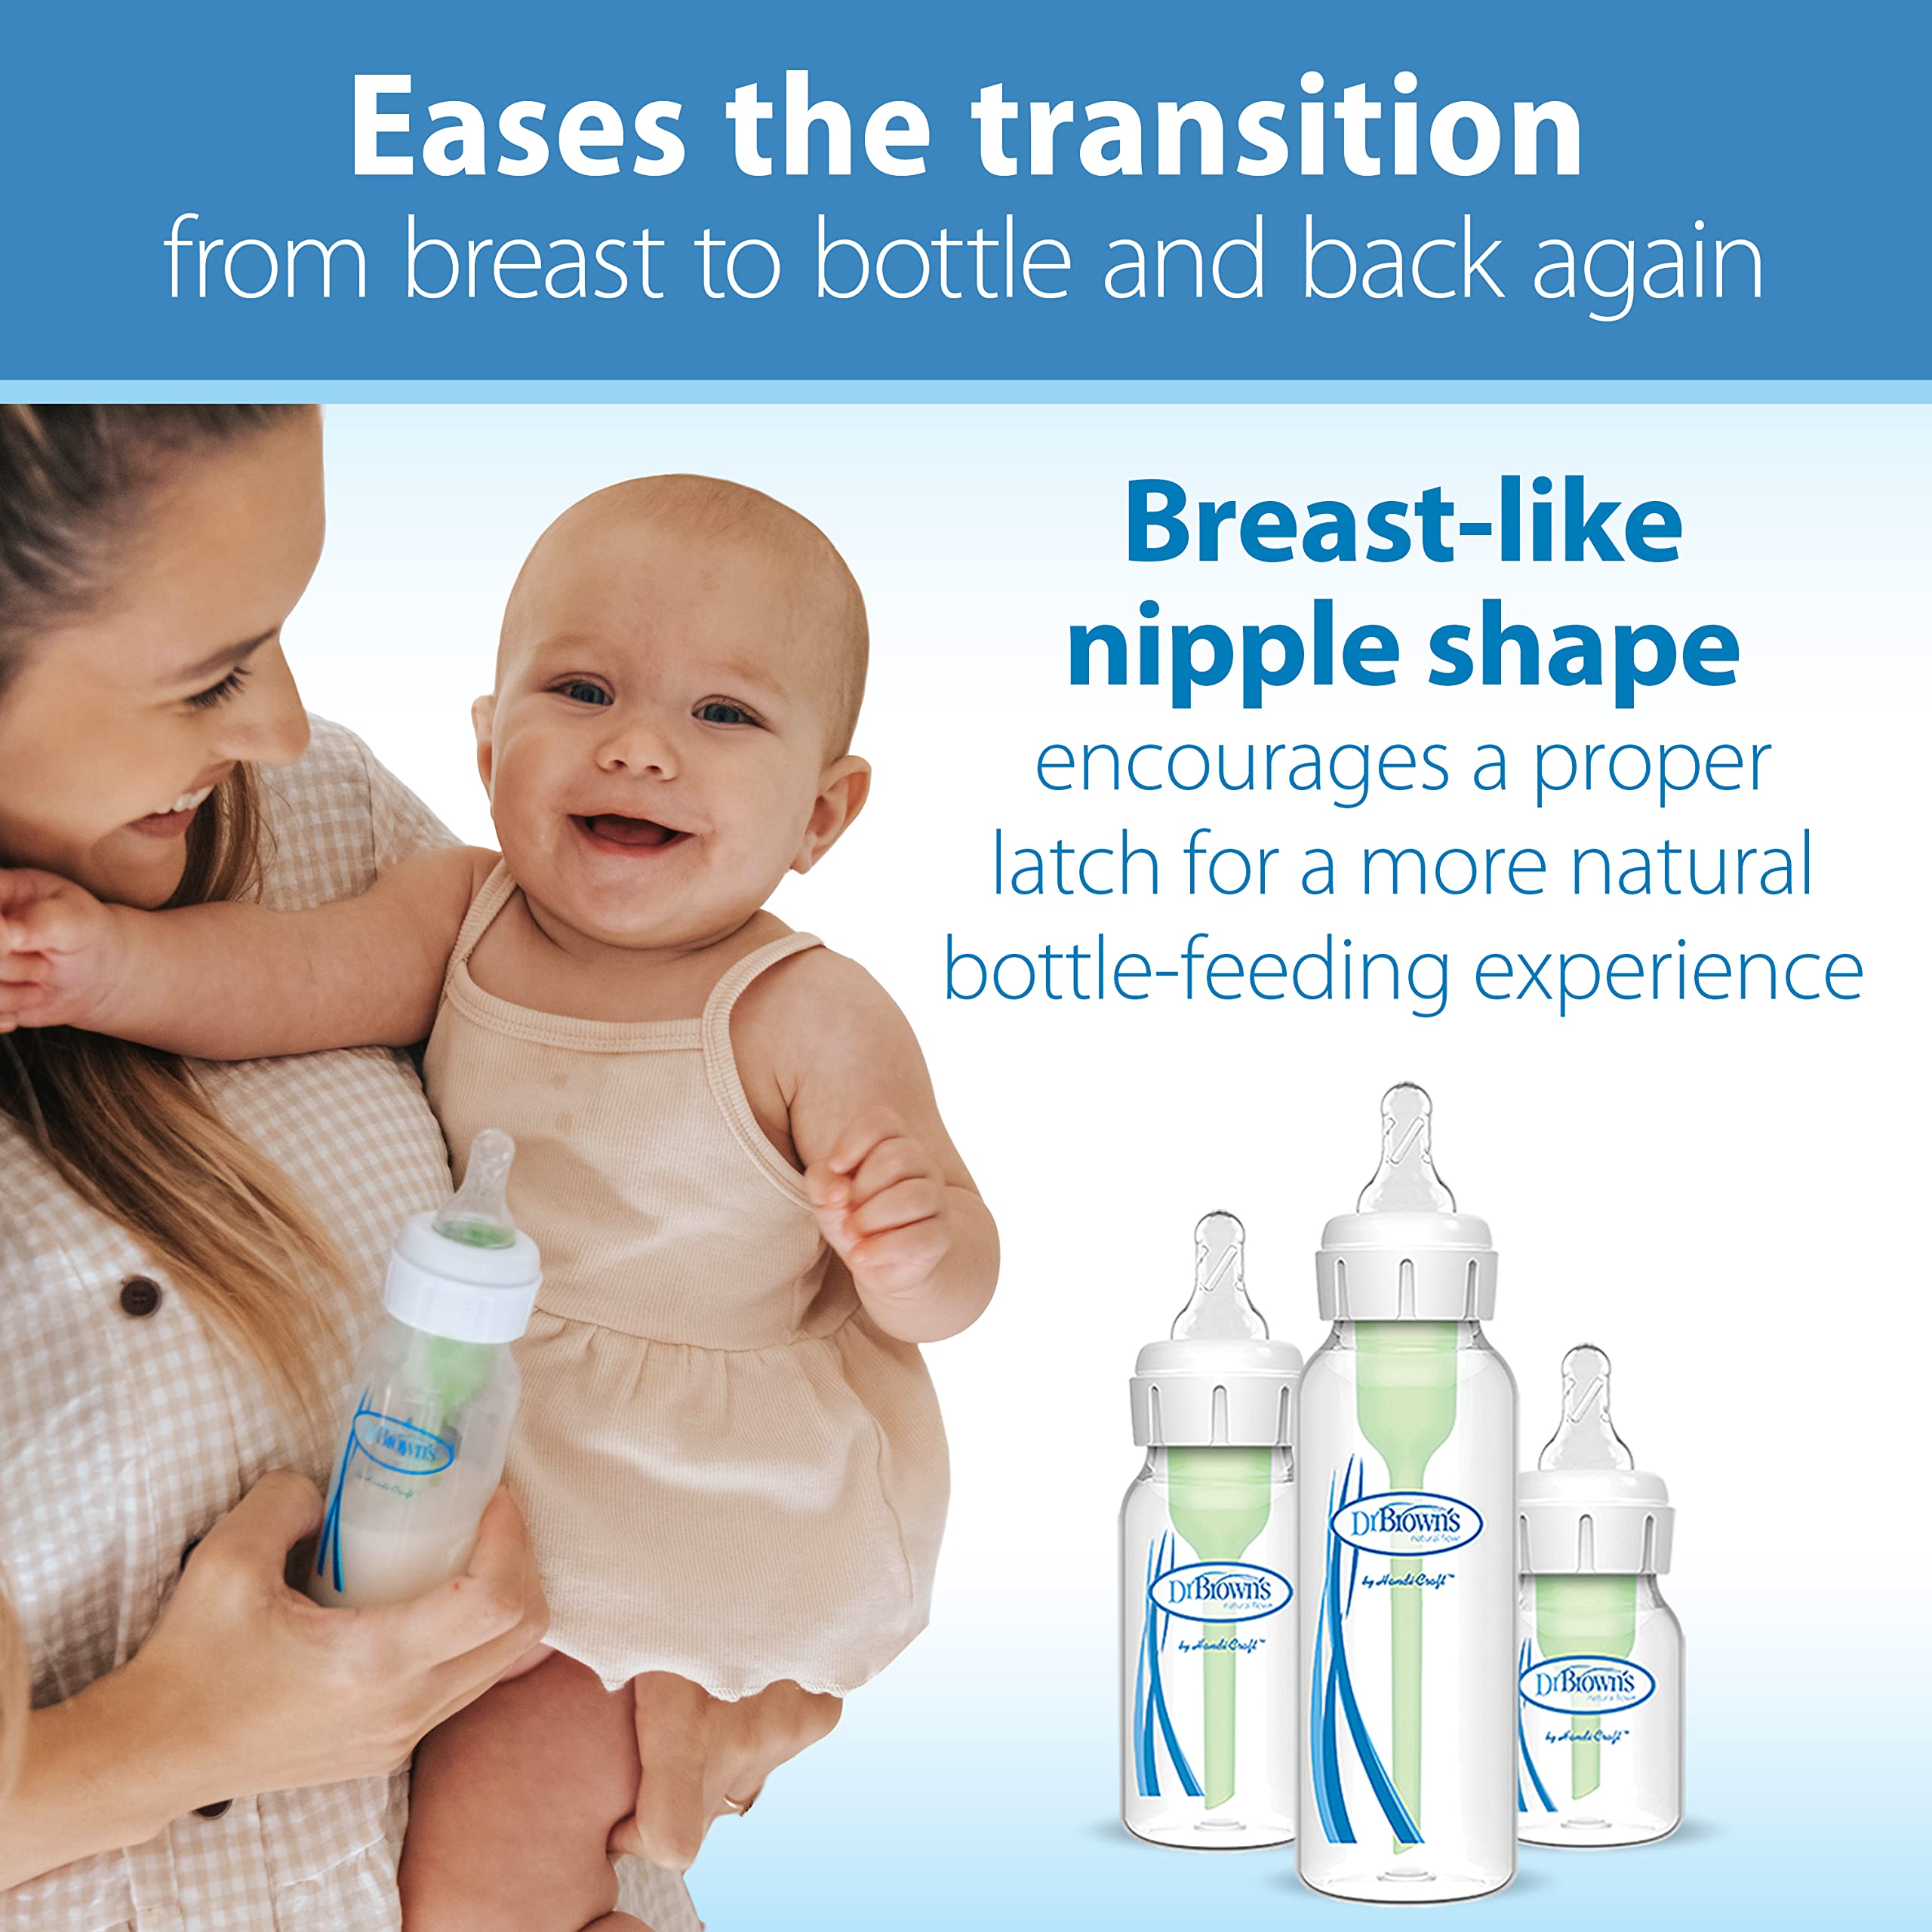 Dr. Brown’s Natural Flow Level 1 Narrow Baby Bottle Silicone Nipple, Slow Flow, 0m+, 100% Silicone Bottle Nipple, 6 Pack